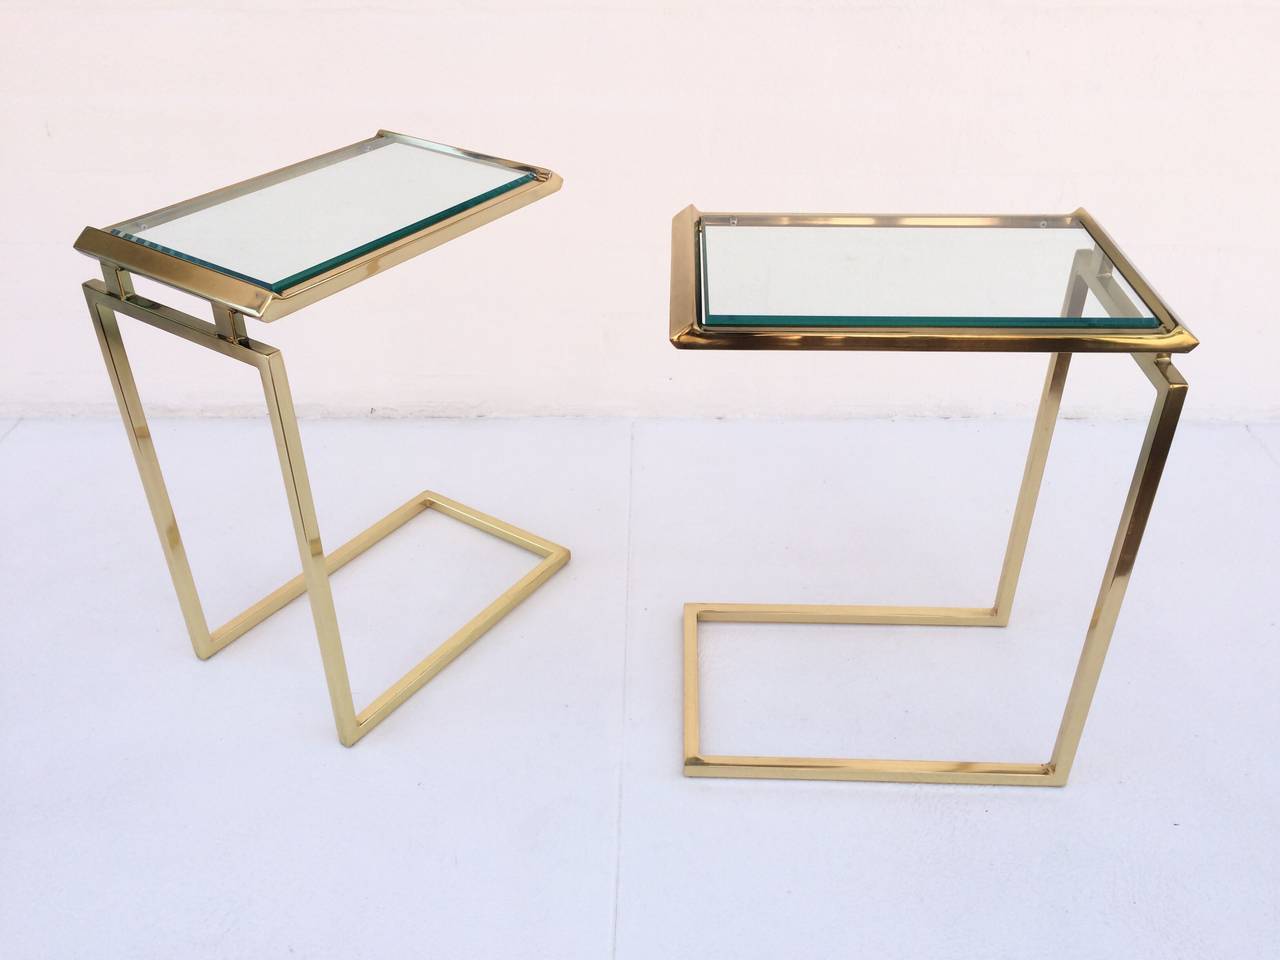 A pair of rare polished brass with inset beveled glass top side tables.
These beautifully designed side tables are by Milo Baughman, circa 1970s.
Perfect for cocktails and hors d'oeuvres.